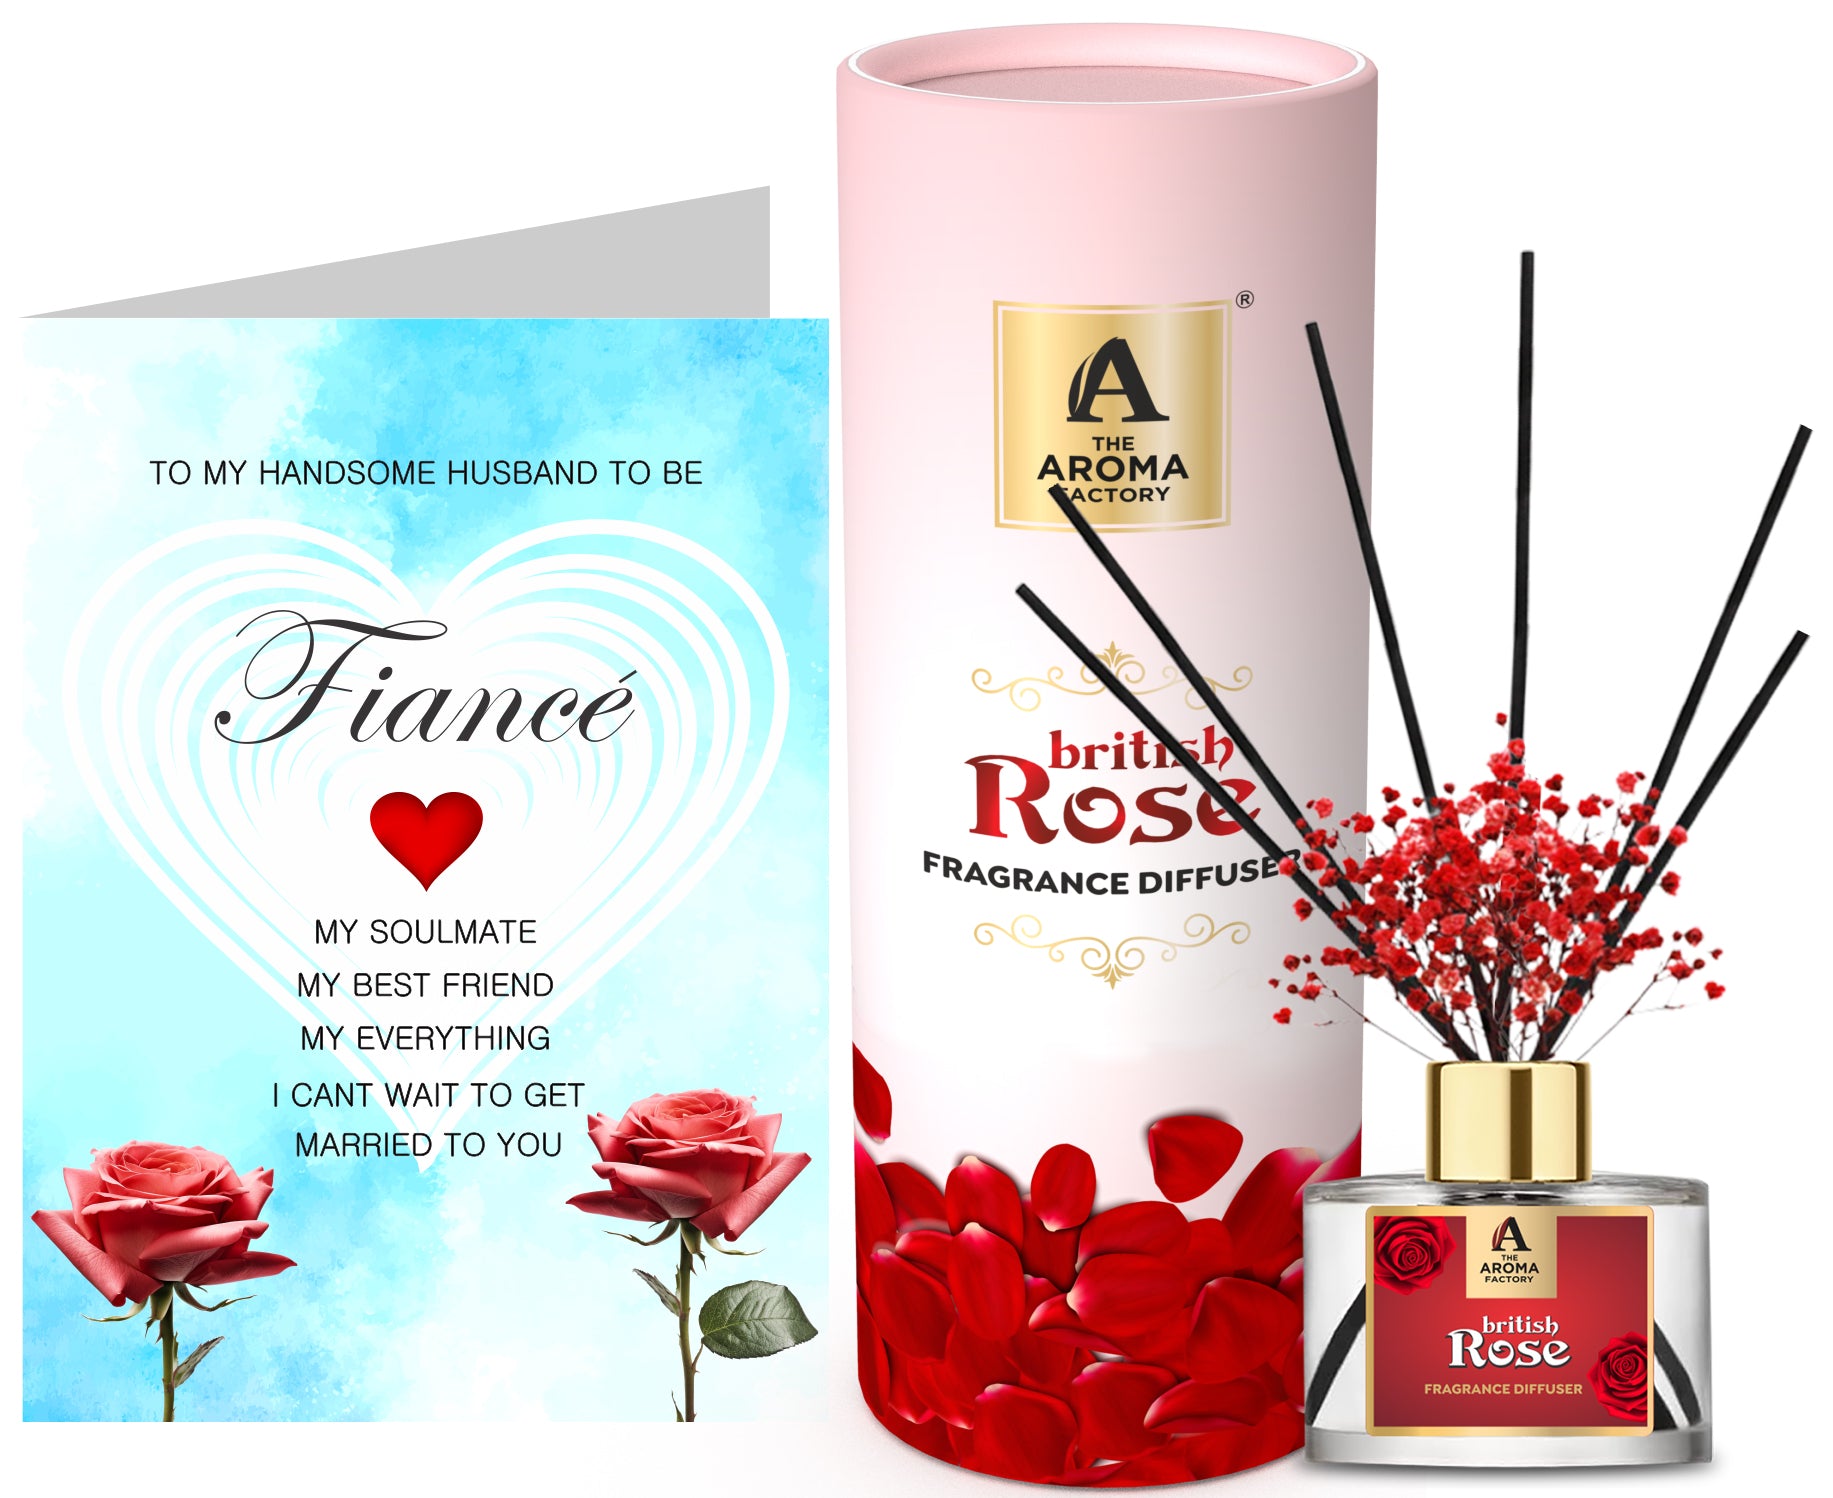 The Aroma Factory Gift for Fiance Male/Husband to be with Card, British Rose Fragrance Reed Diffuser Set (1 Box &1 Card)